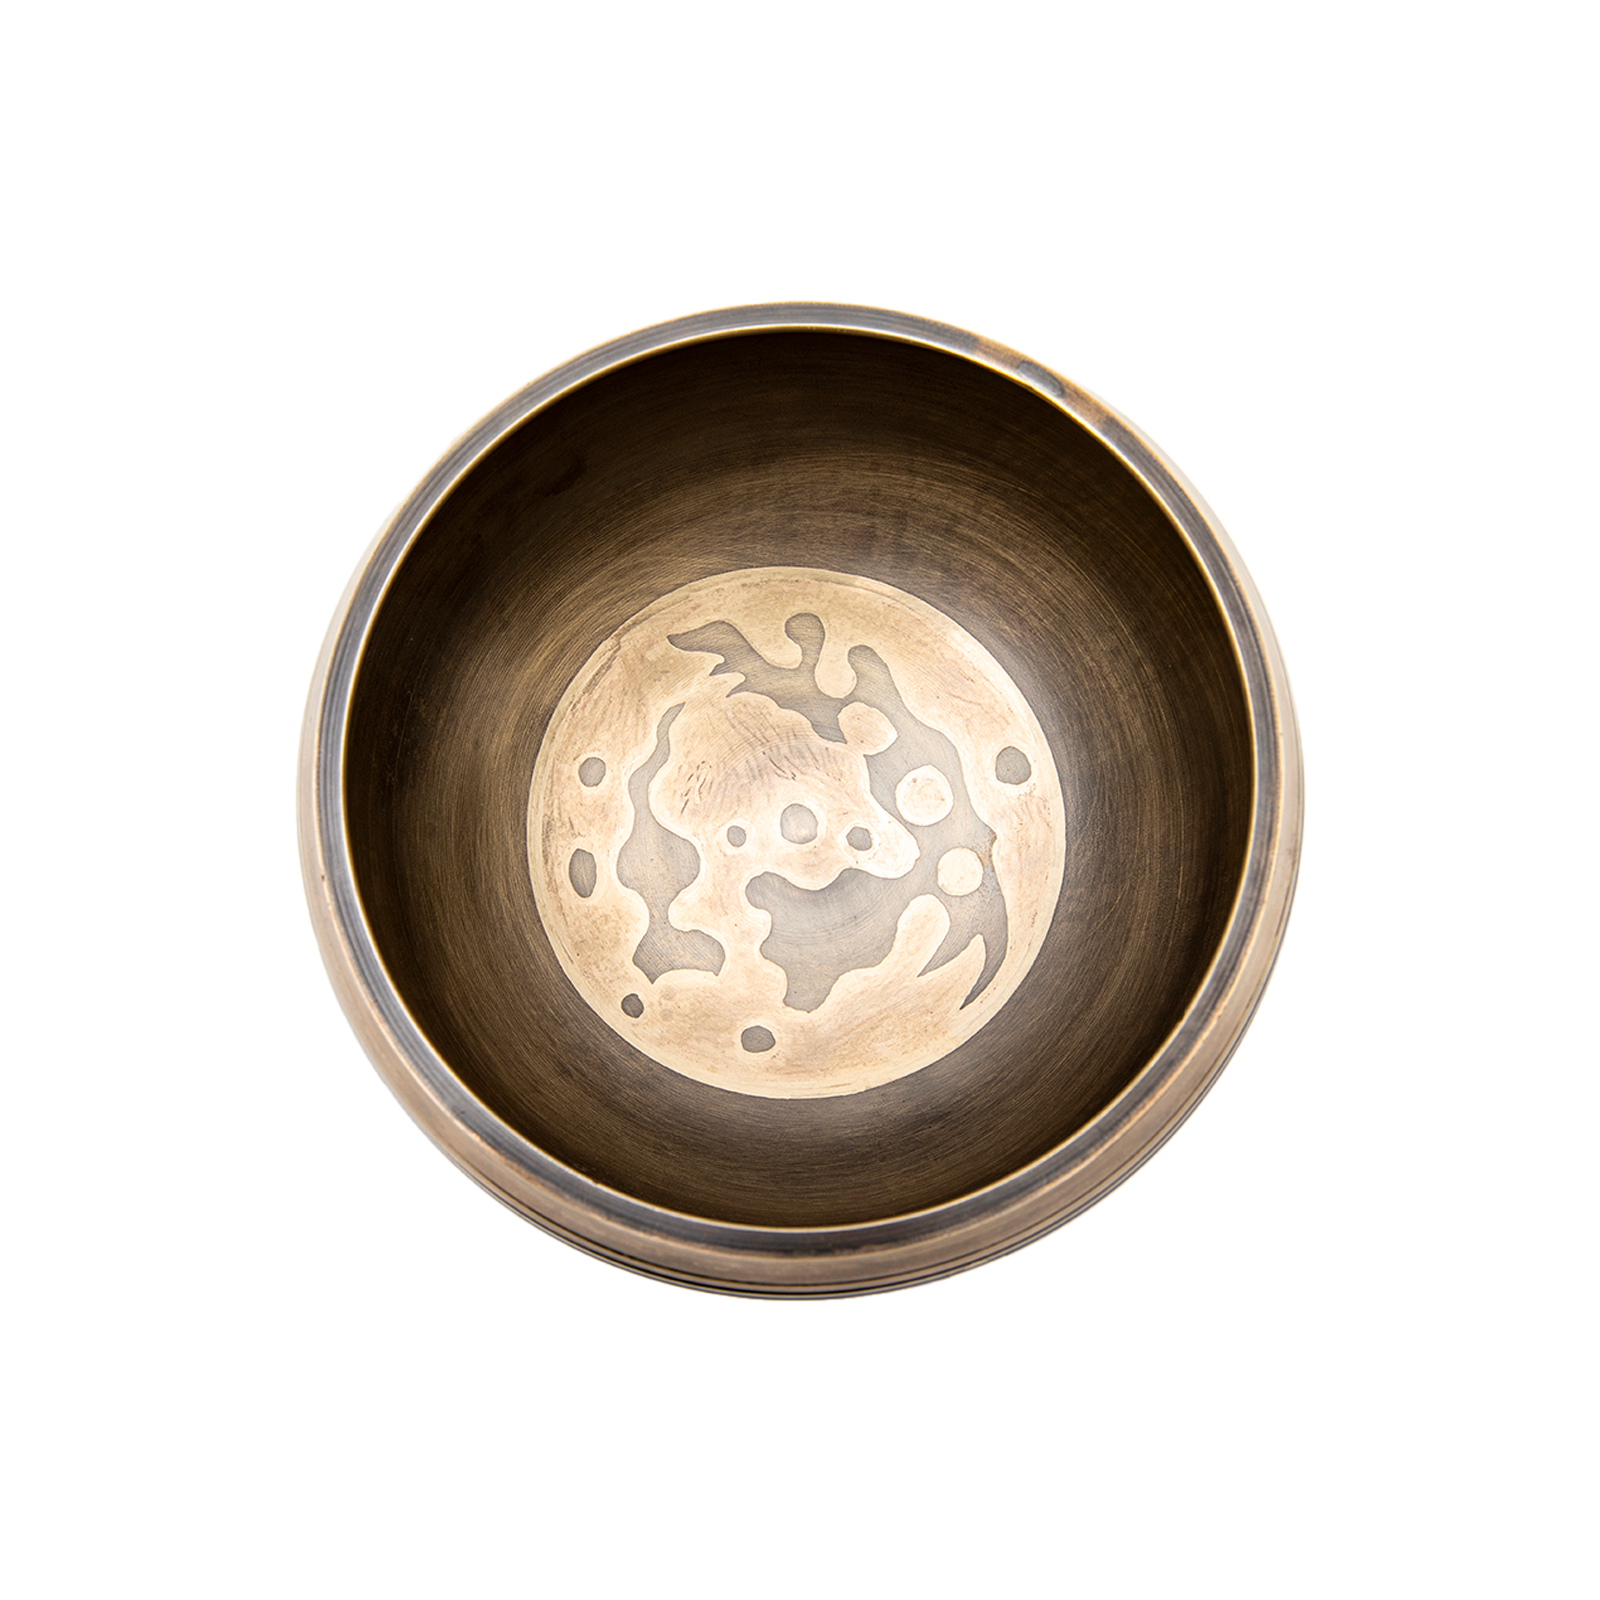 Inside view of just the Full Moon Singing Bowl on a white backdrop.